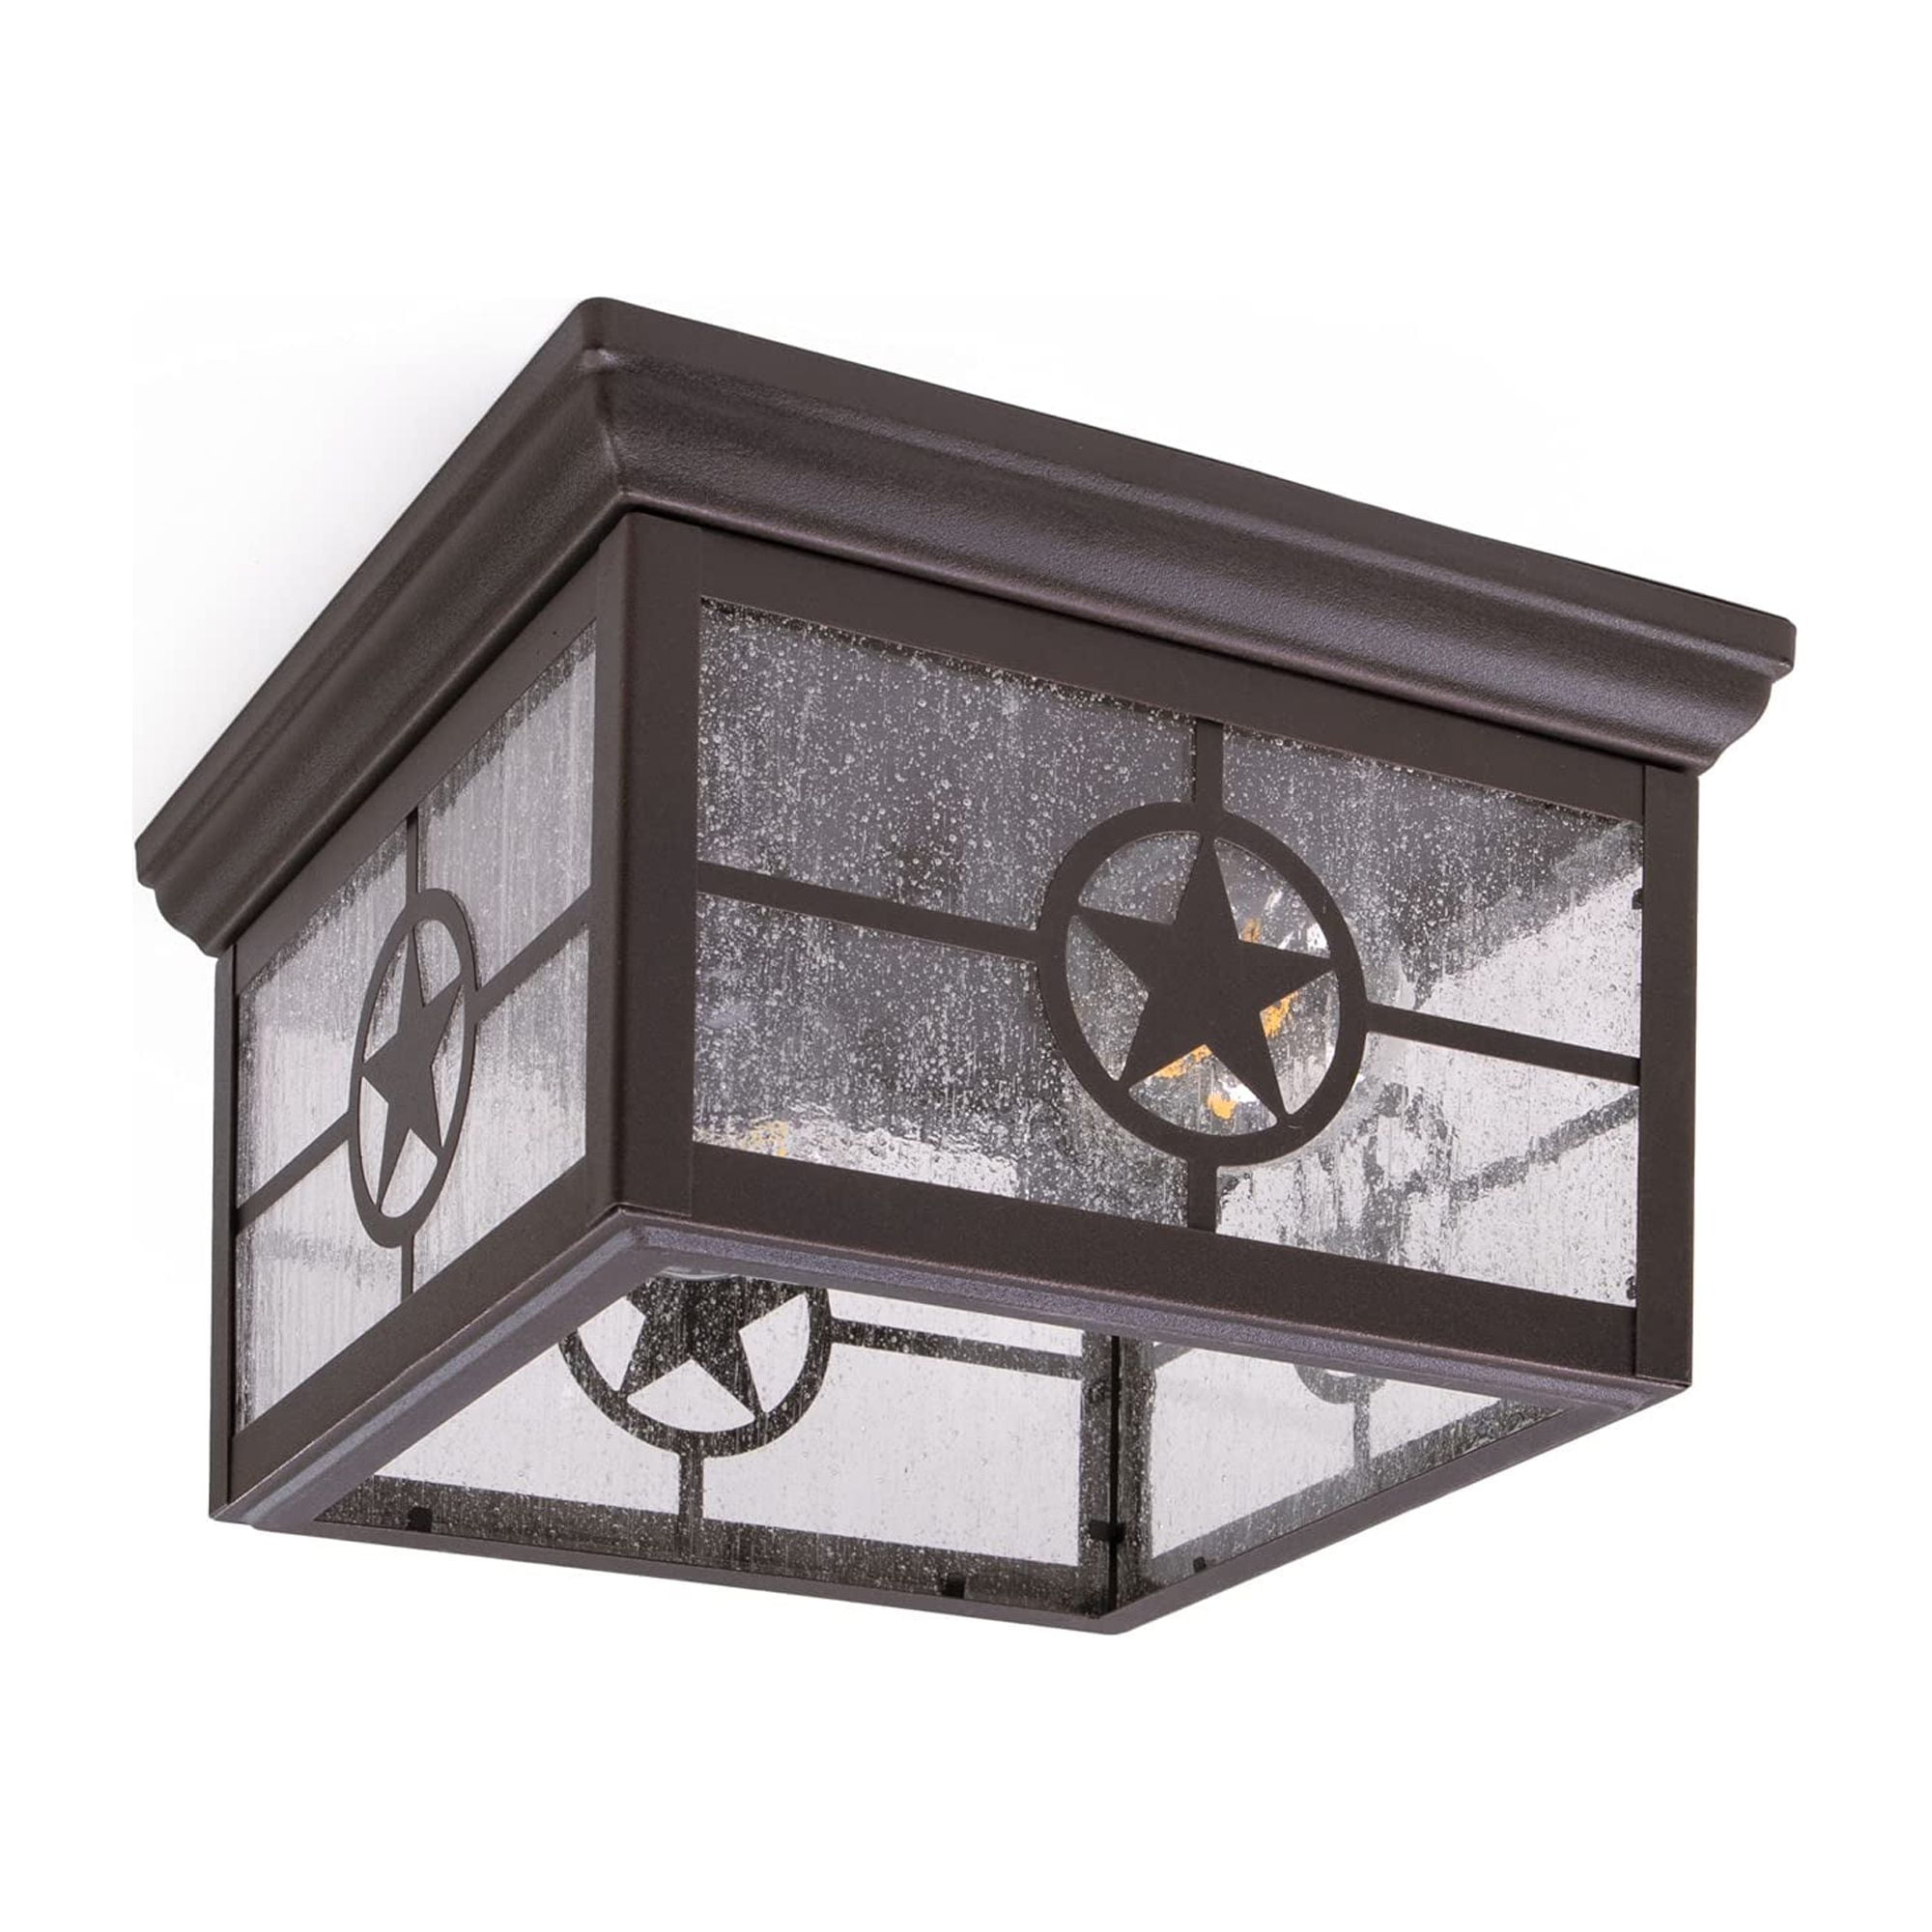 CORAMDEO Country Star Square Light Ceiling Mount Farmhouse Fixture,  Indoor or Outdoor, Two Standard Sockets, Open Bottom, Damp Location, Black  Powder Coat Finish with Seedy Glass (OC0031S-E26-BLK)